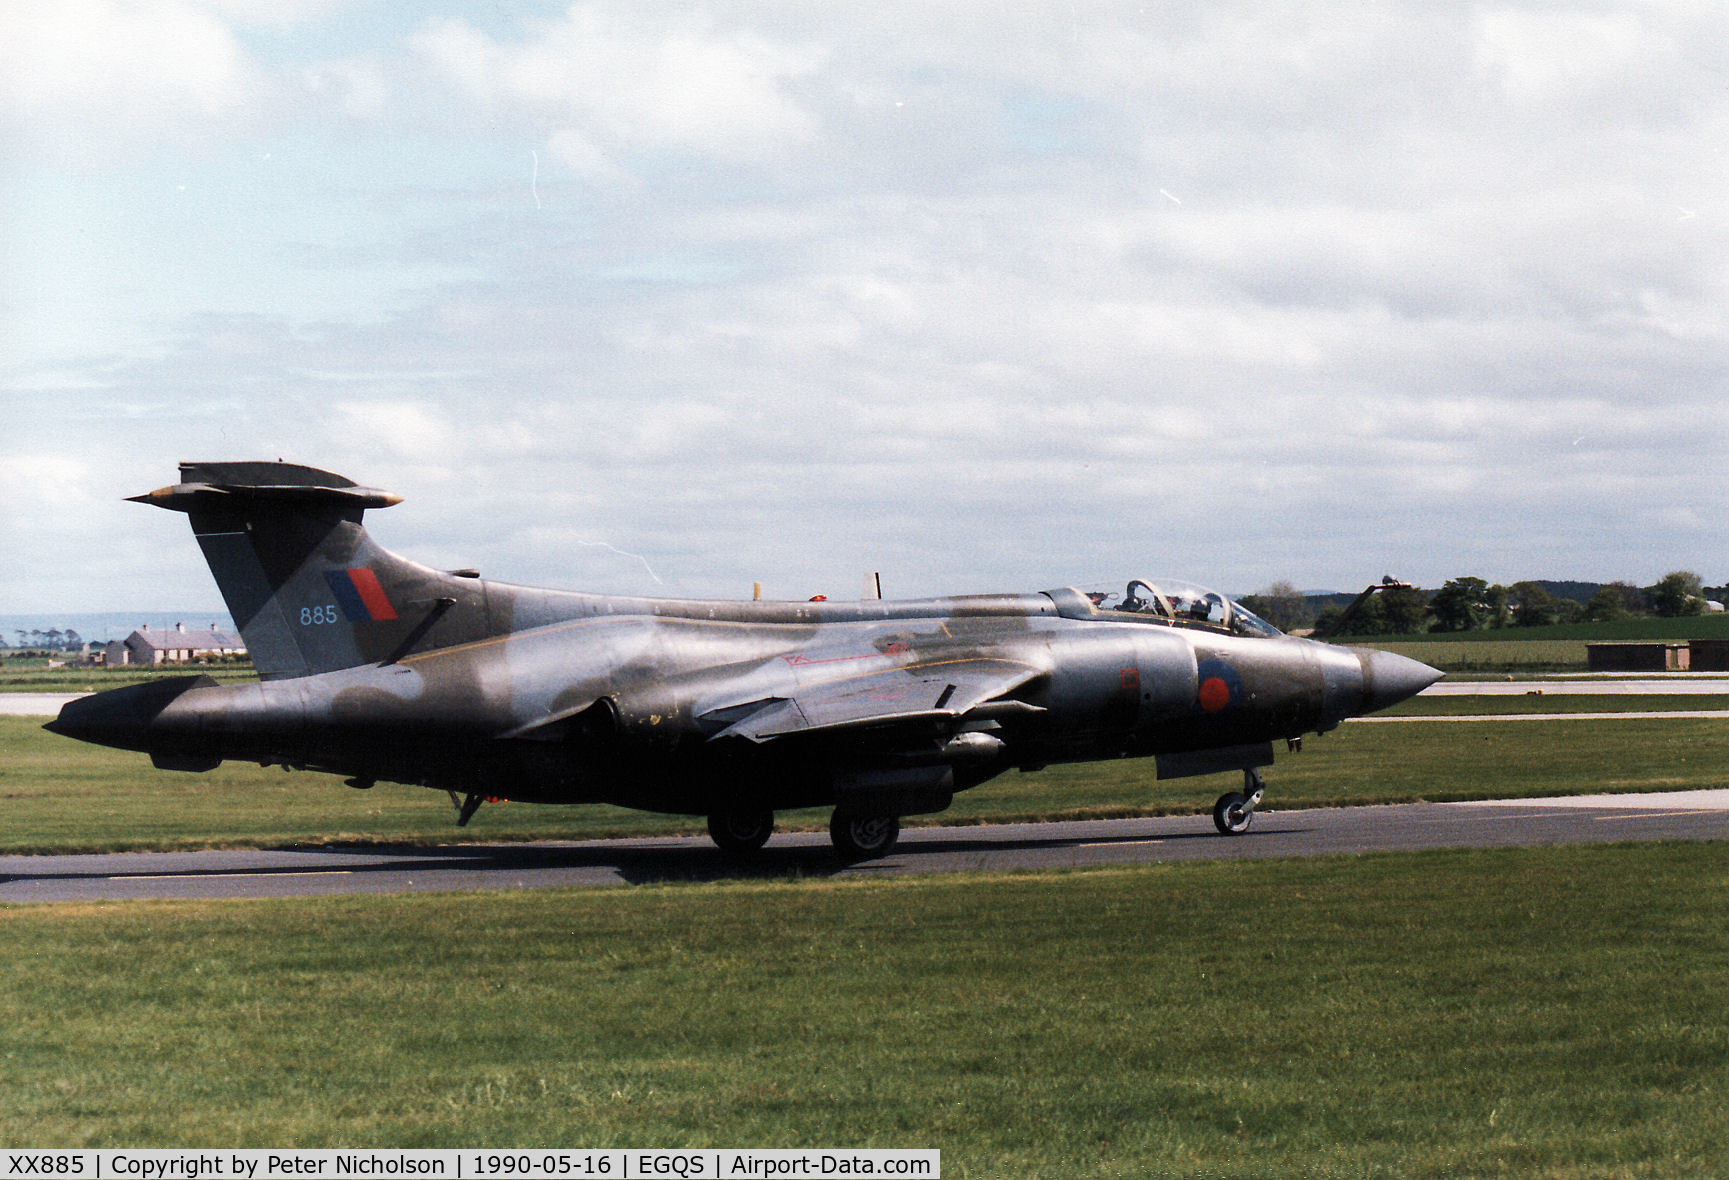 XX885, 1974 Hawker Siddeley Buccaneer S.2B C/N B3-01-73, Another view of this Buccaneer S.2B of 12 Squadron joining the active runway at RAF Lossiemouth in May 1990.